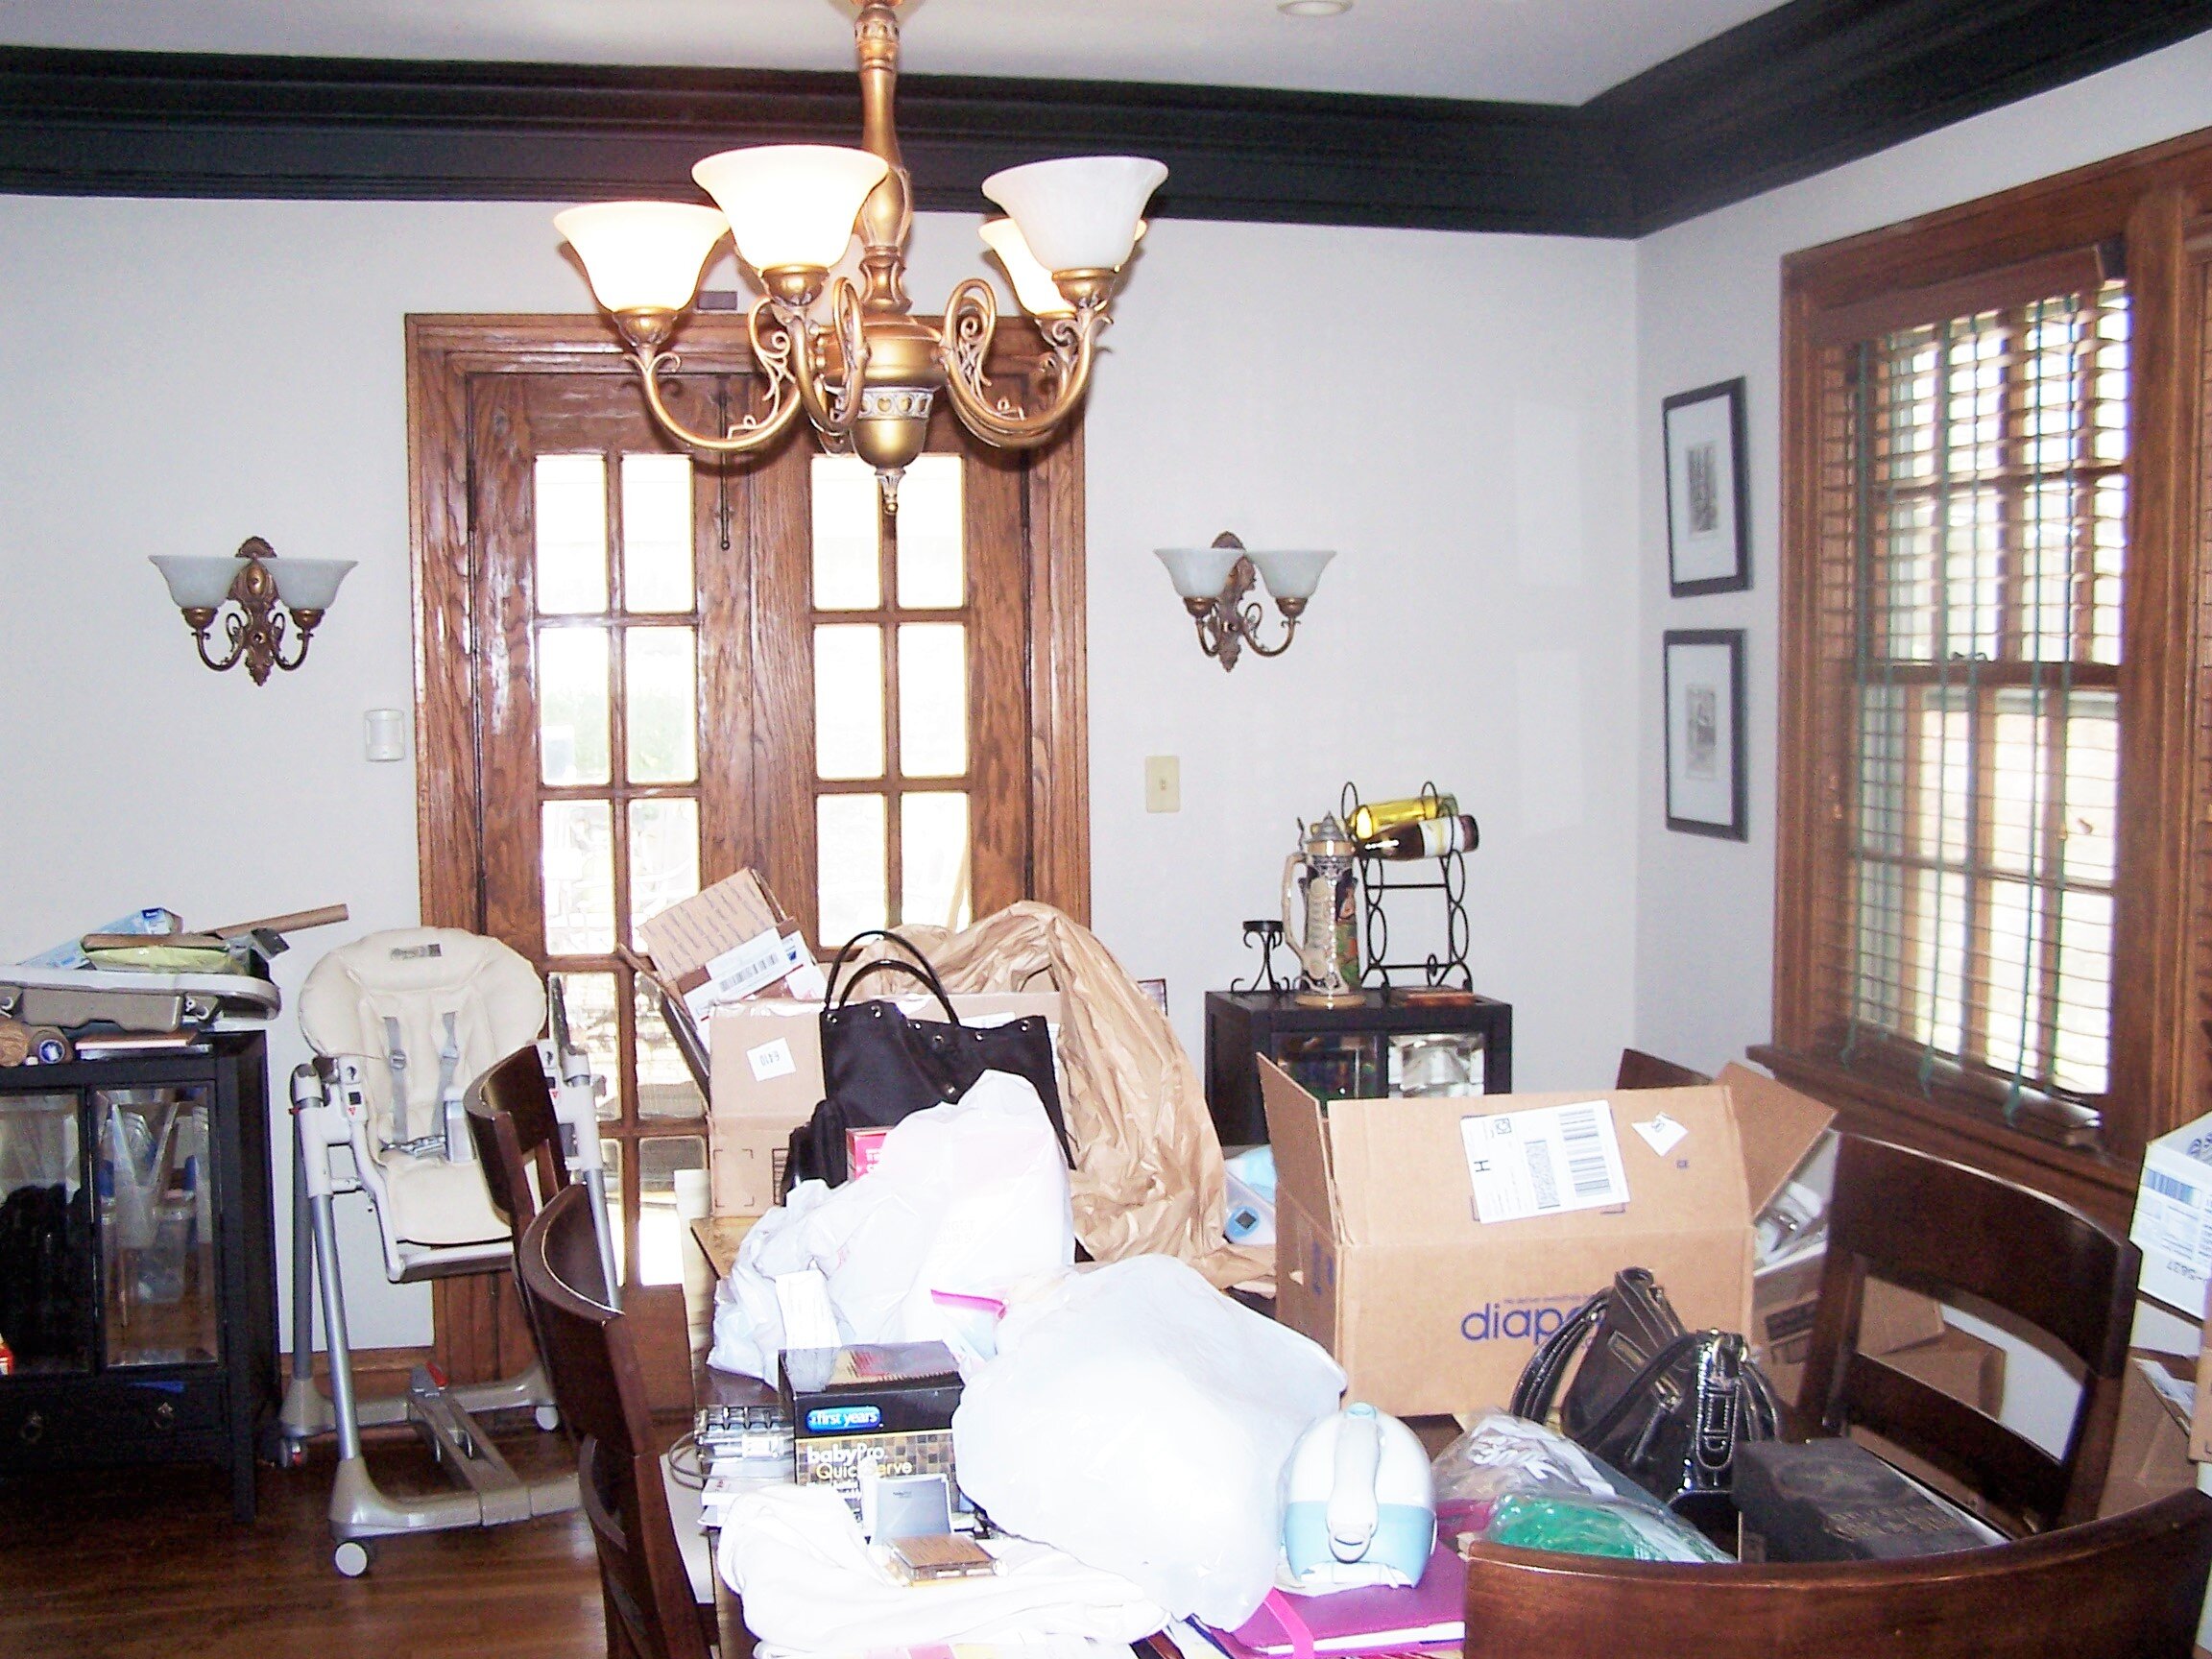 Before: This Dining Room was a storage room in Kansas City Missouri